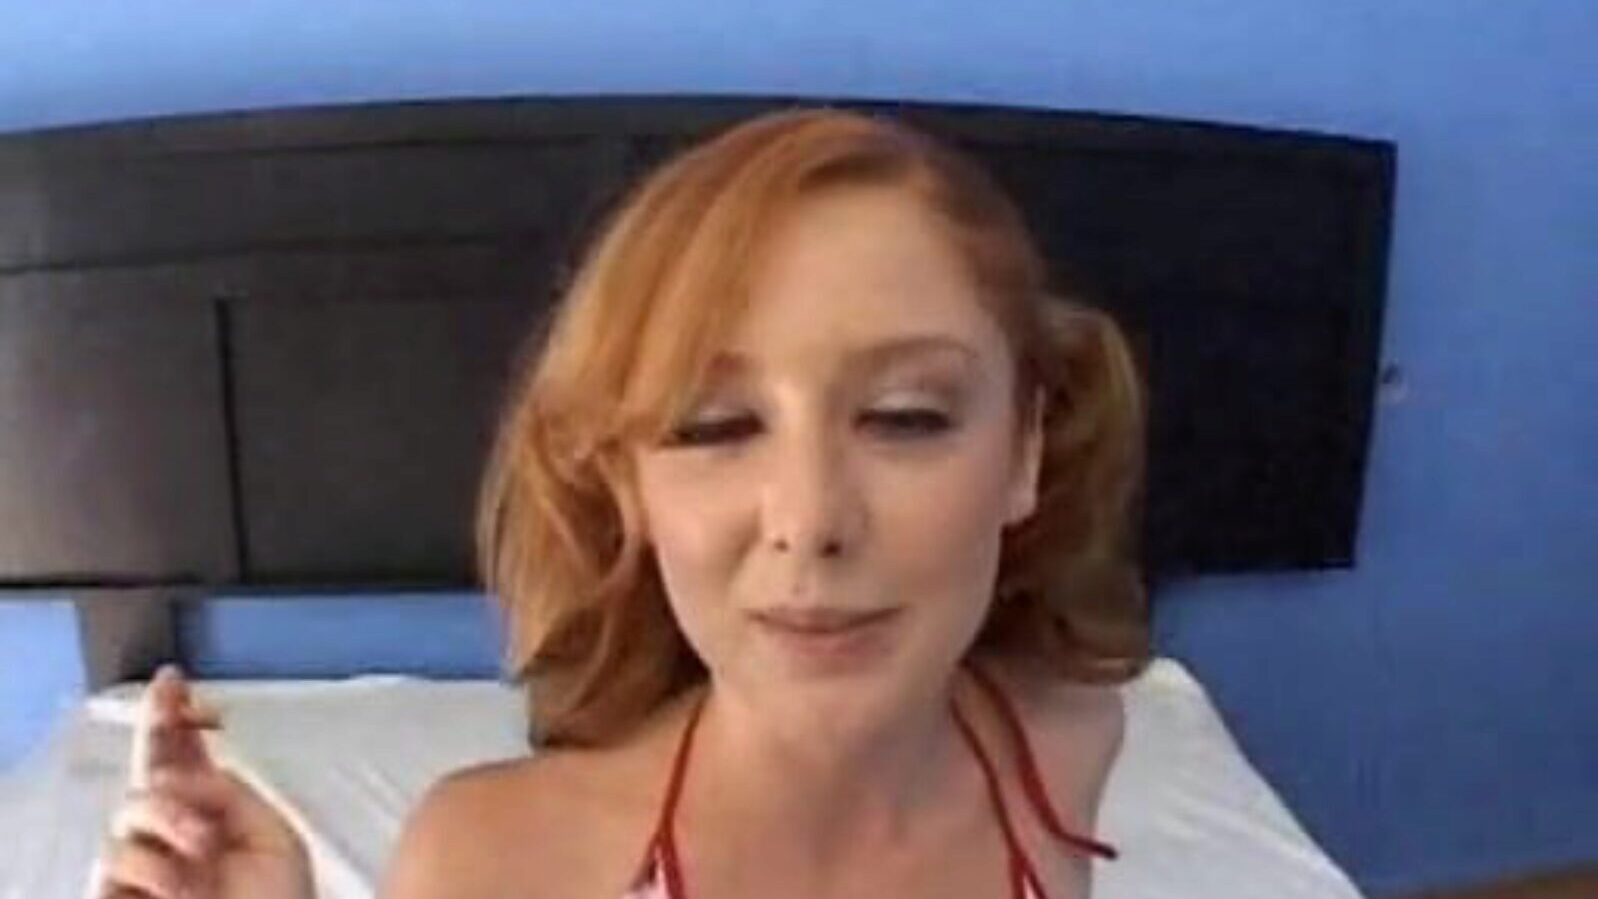 buttfuck sandy-haired yeah i love me some redheads gettin assfucked this bitch is a skank أيضًا